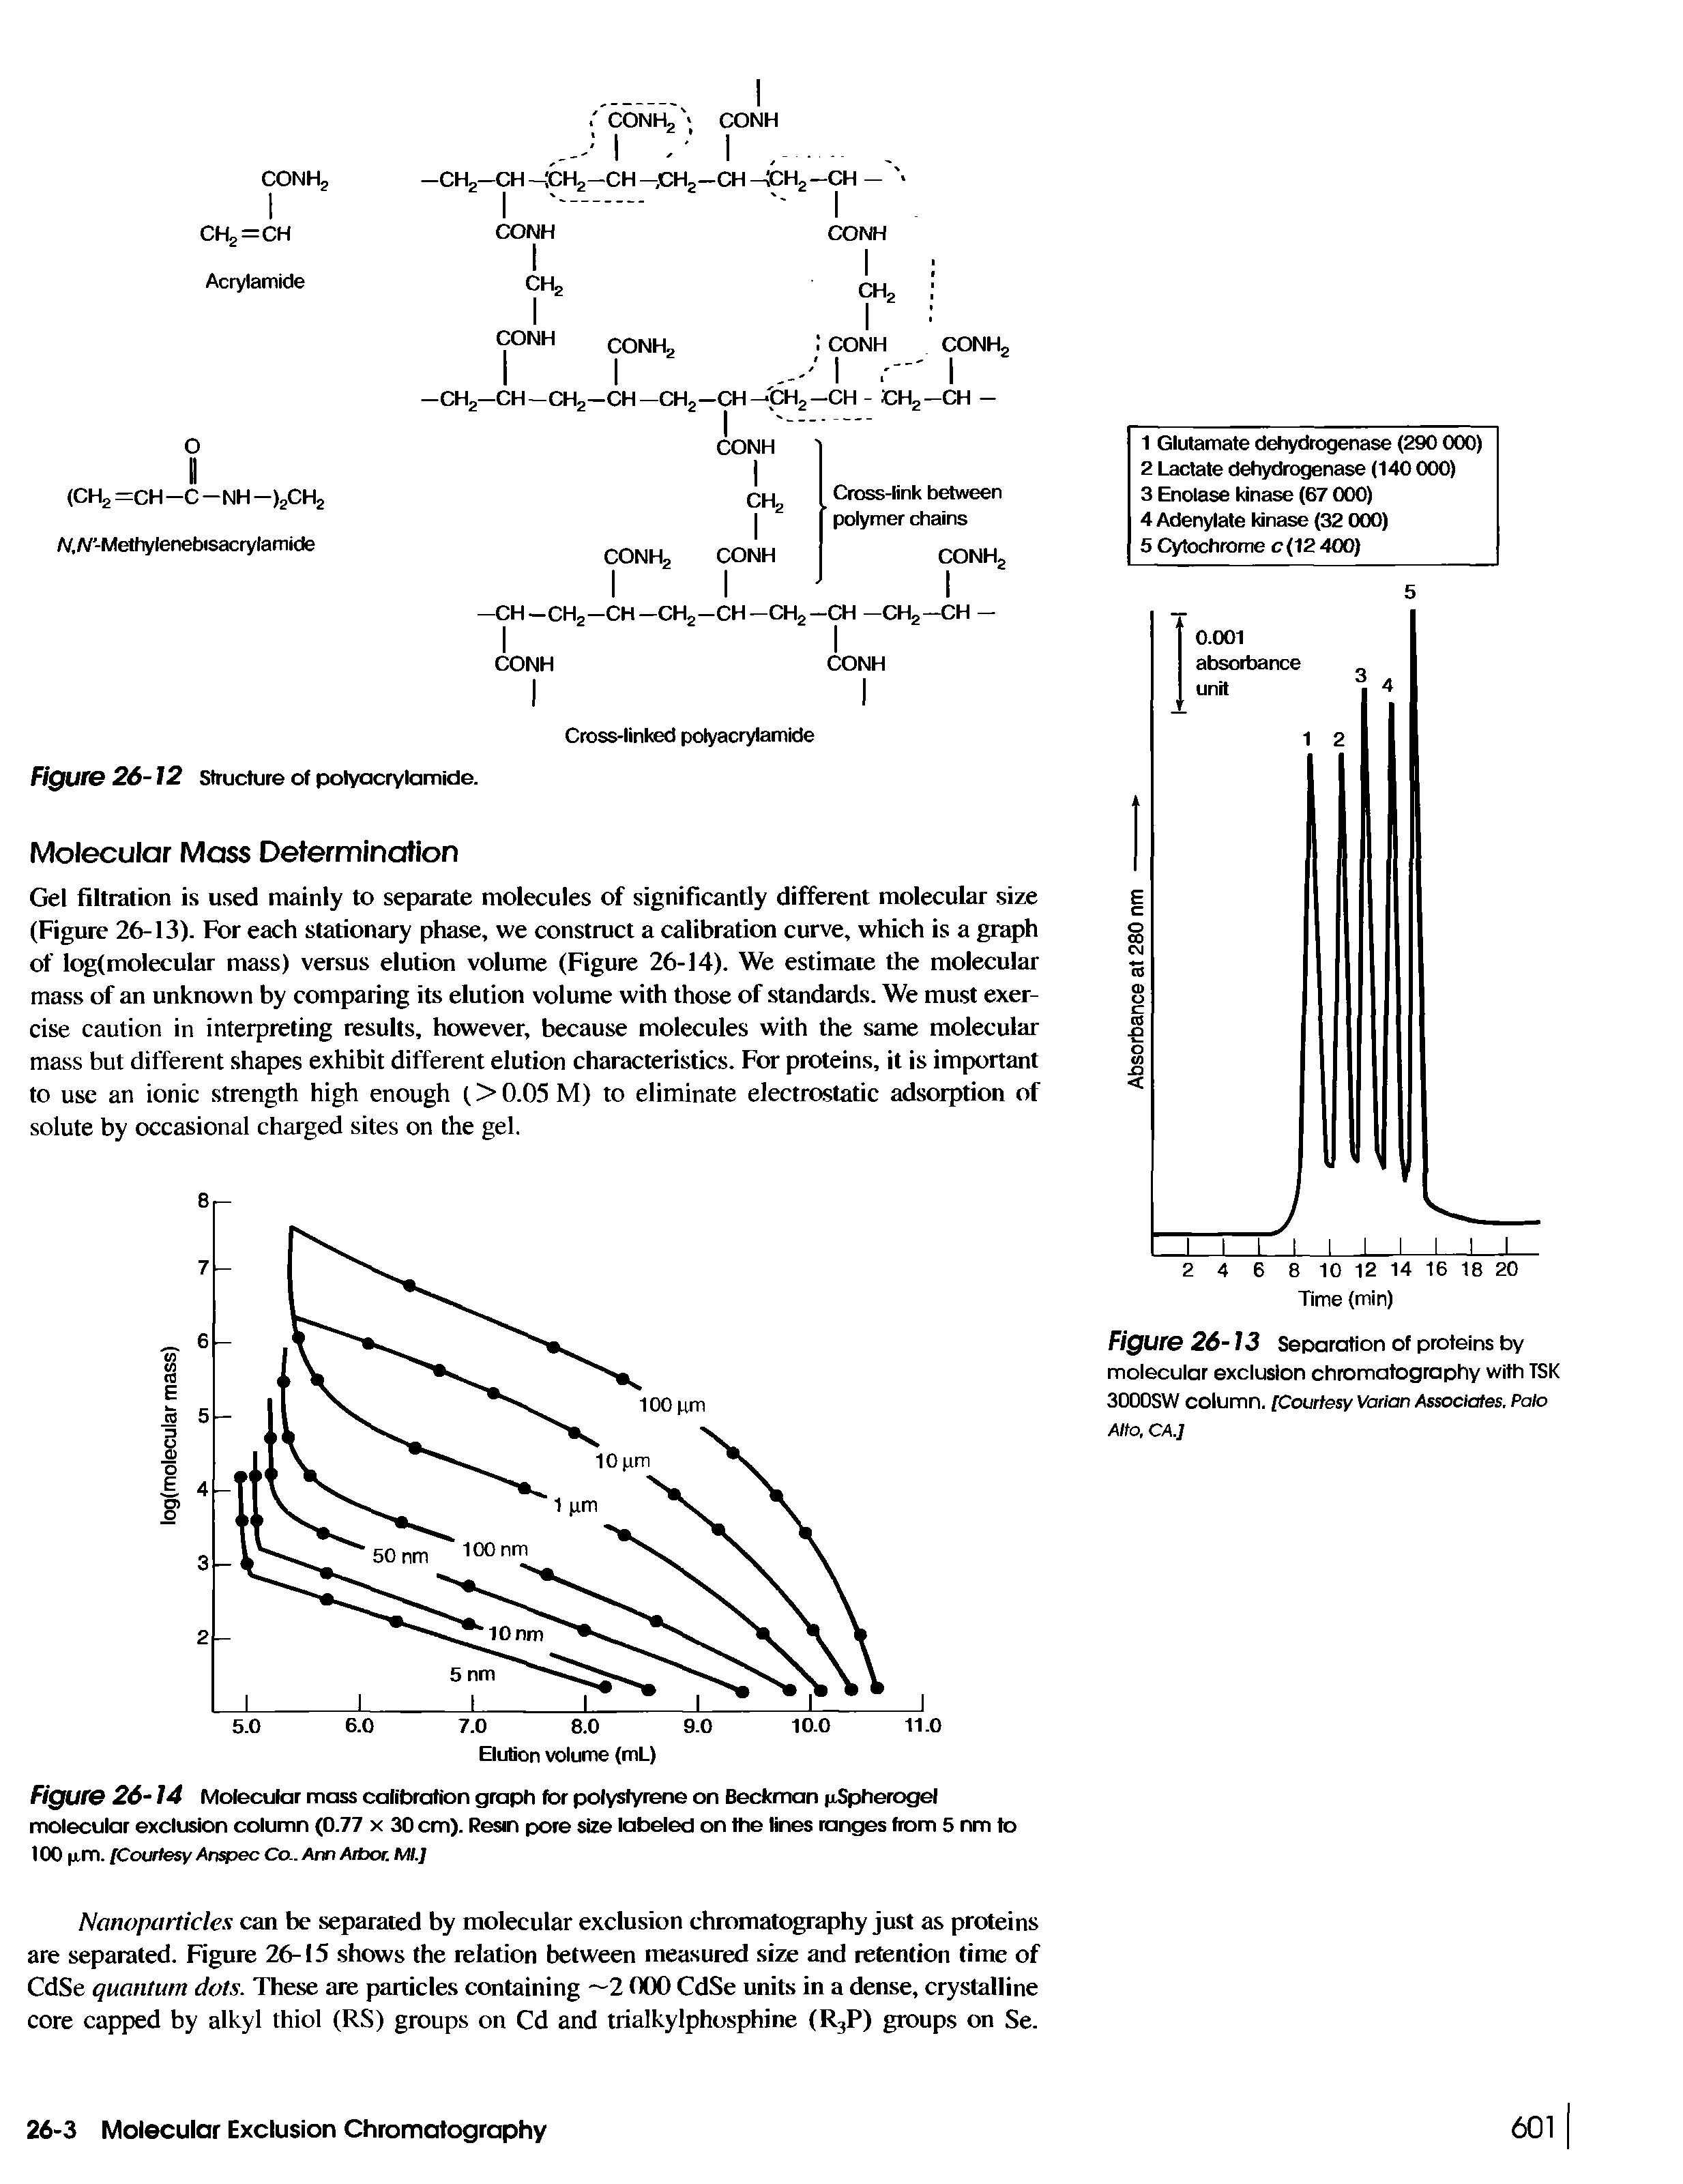 Figure 26-14 Molecular mass calibration graph for polystyrene on Beckman pSpherogel molecular exclusion column (0.77 x 30 cm). Resin pore size labeled on the lines ranges from 5 nm to 100 pm. /Courtesy Anspec Co.. Ann Arbor. Ml.]...